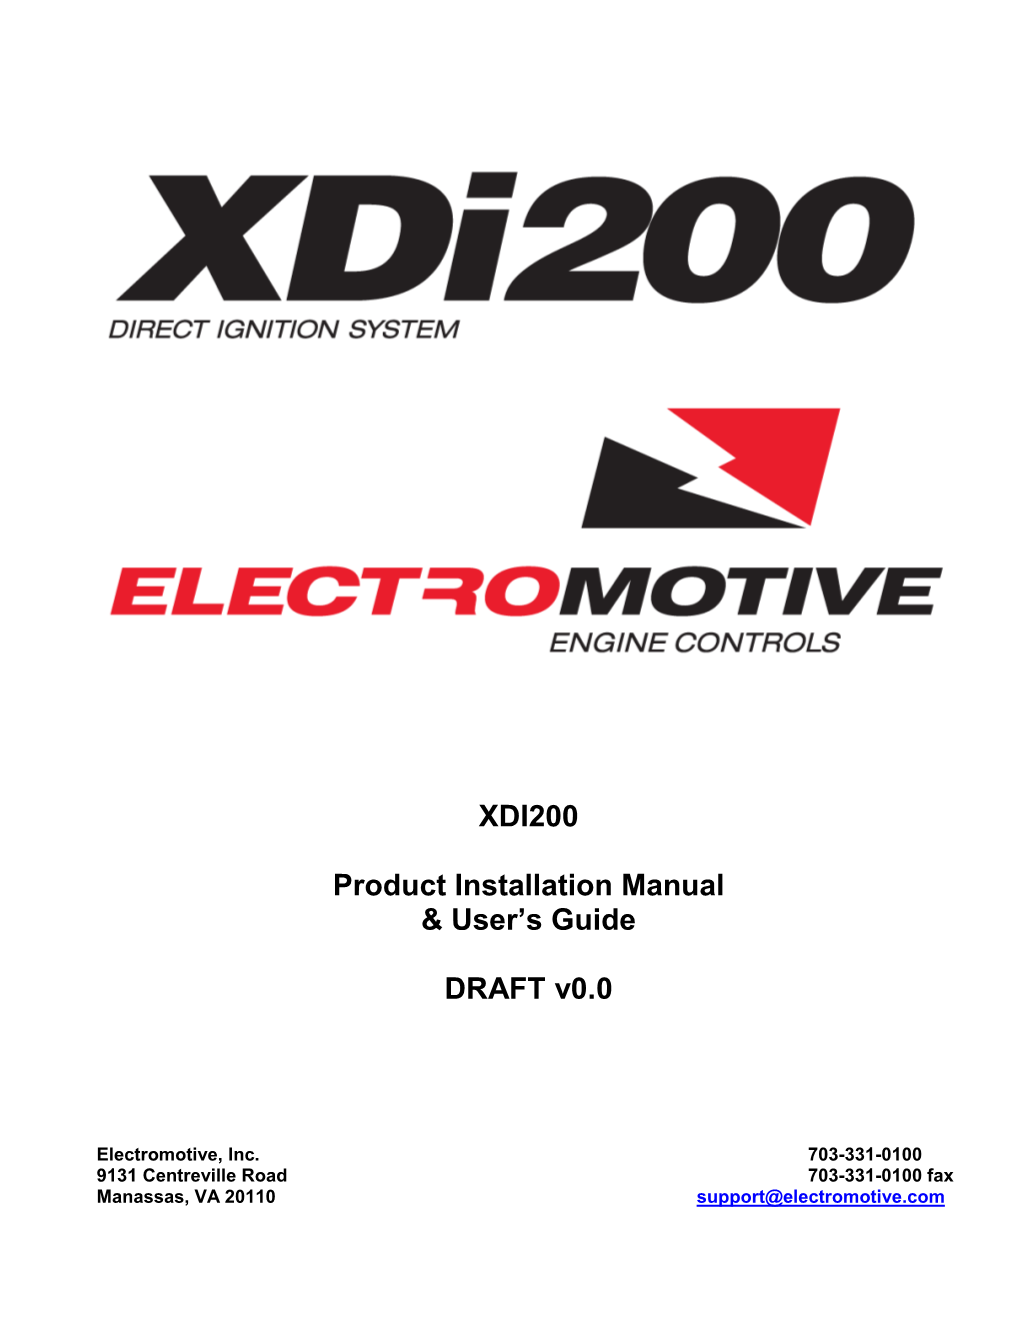 XDI200 Product Installation Manual & User's Guide DRAFT V0.0